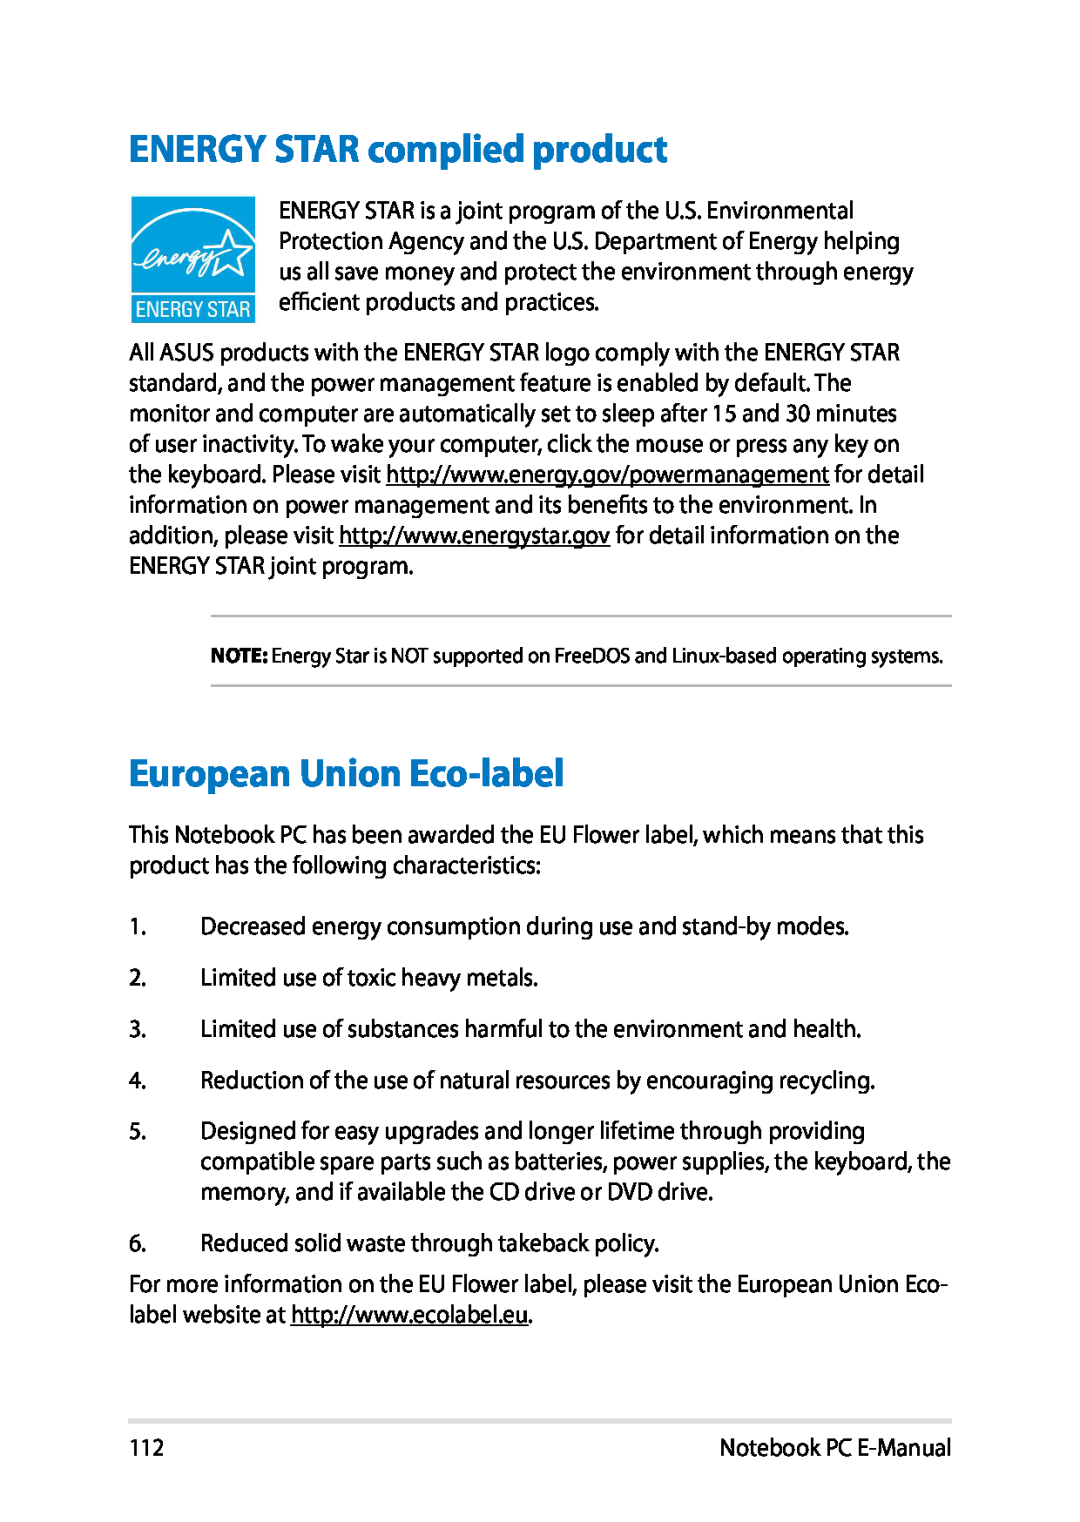 Asus E8438 manual ENERGY STAR complied product, European Union Eco-label 